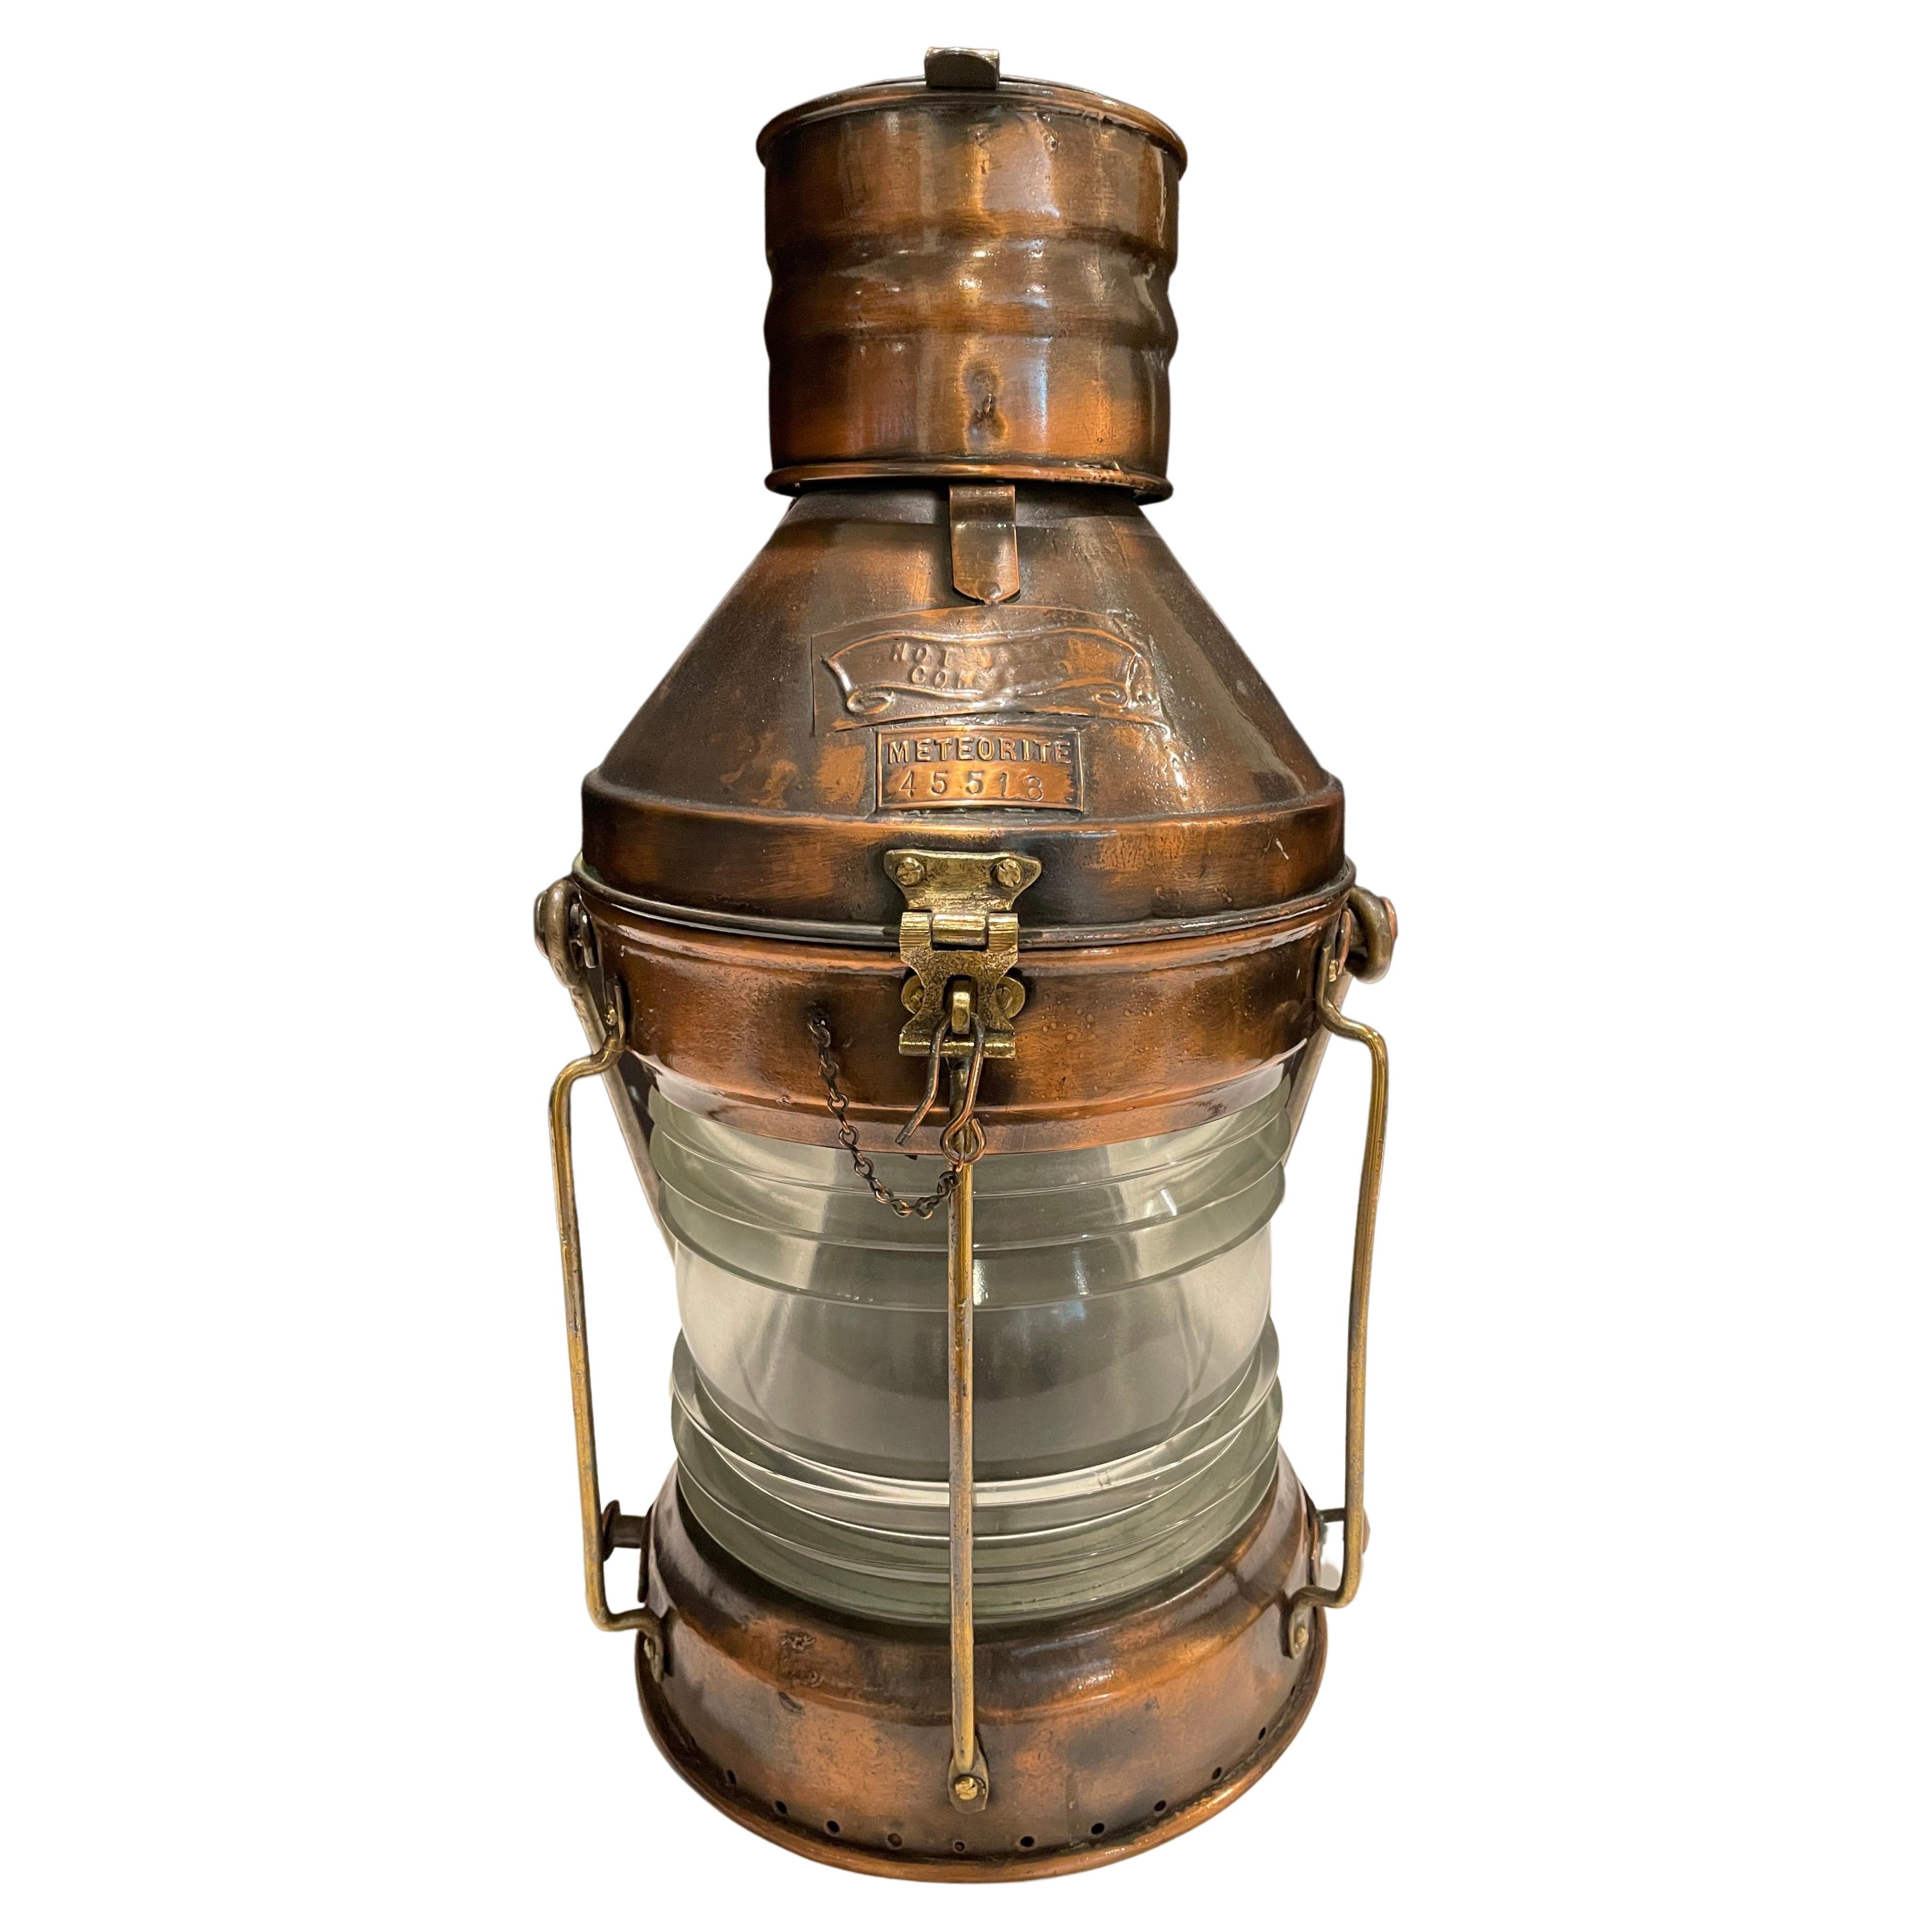 Copper and Glass Ship's Lantern by Meteorite